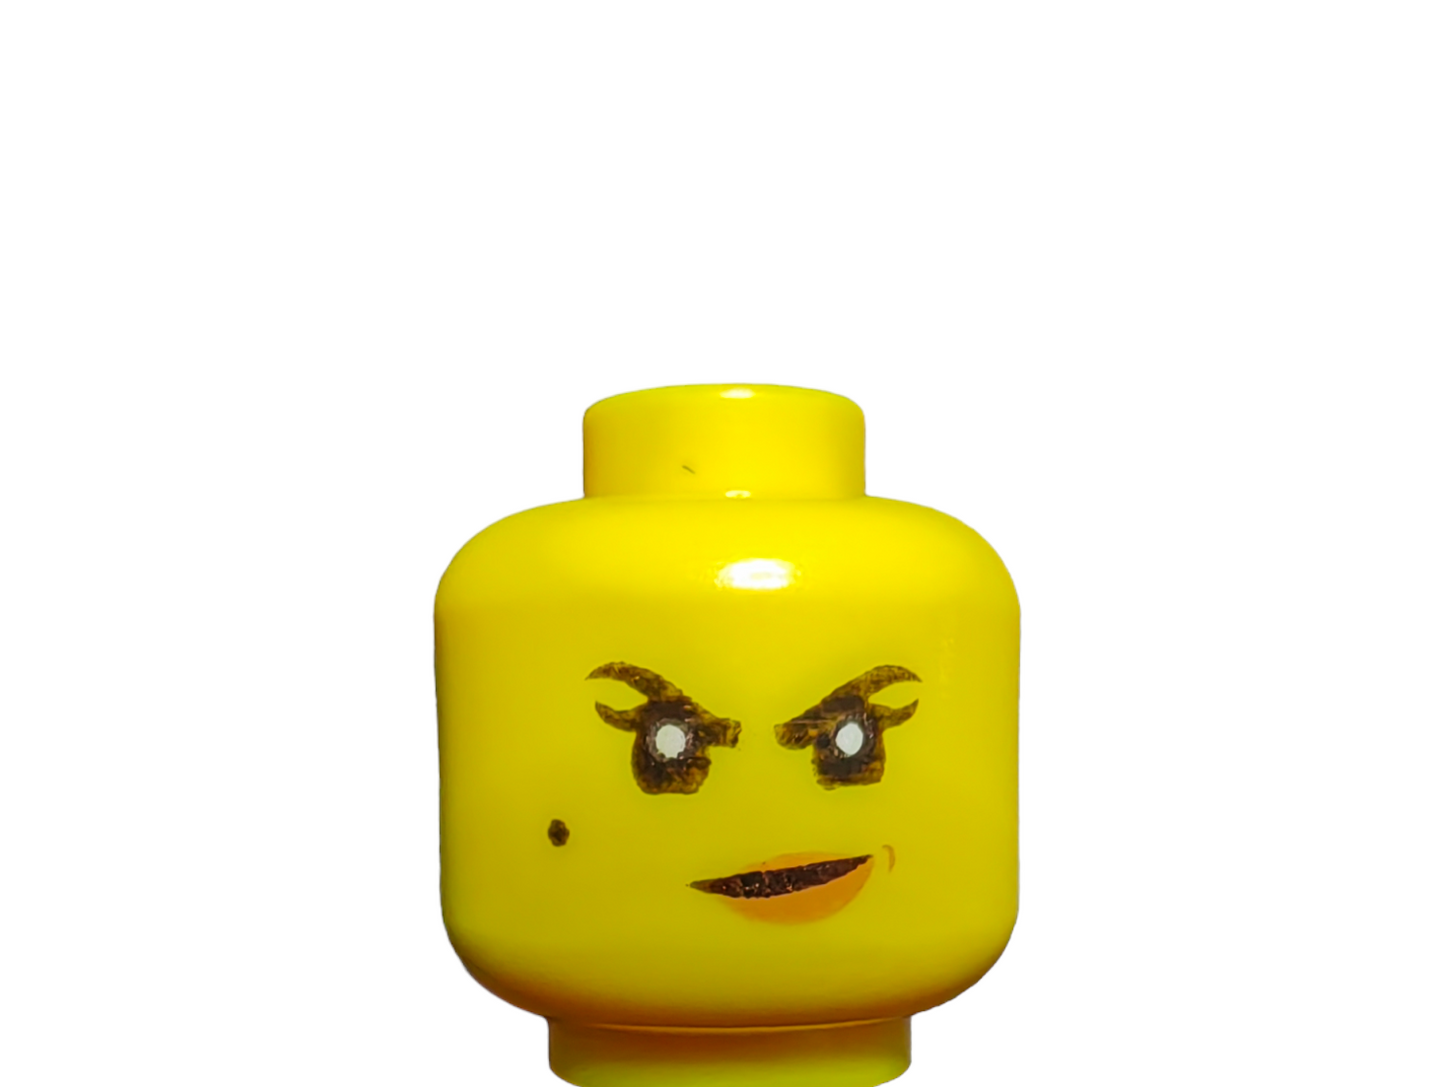 LEGO Head, Female Dual faced head. Angry one side and shocked the other side. - UB1497